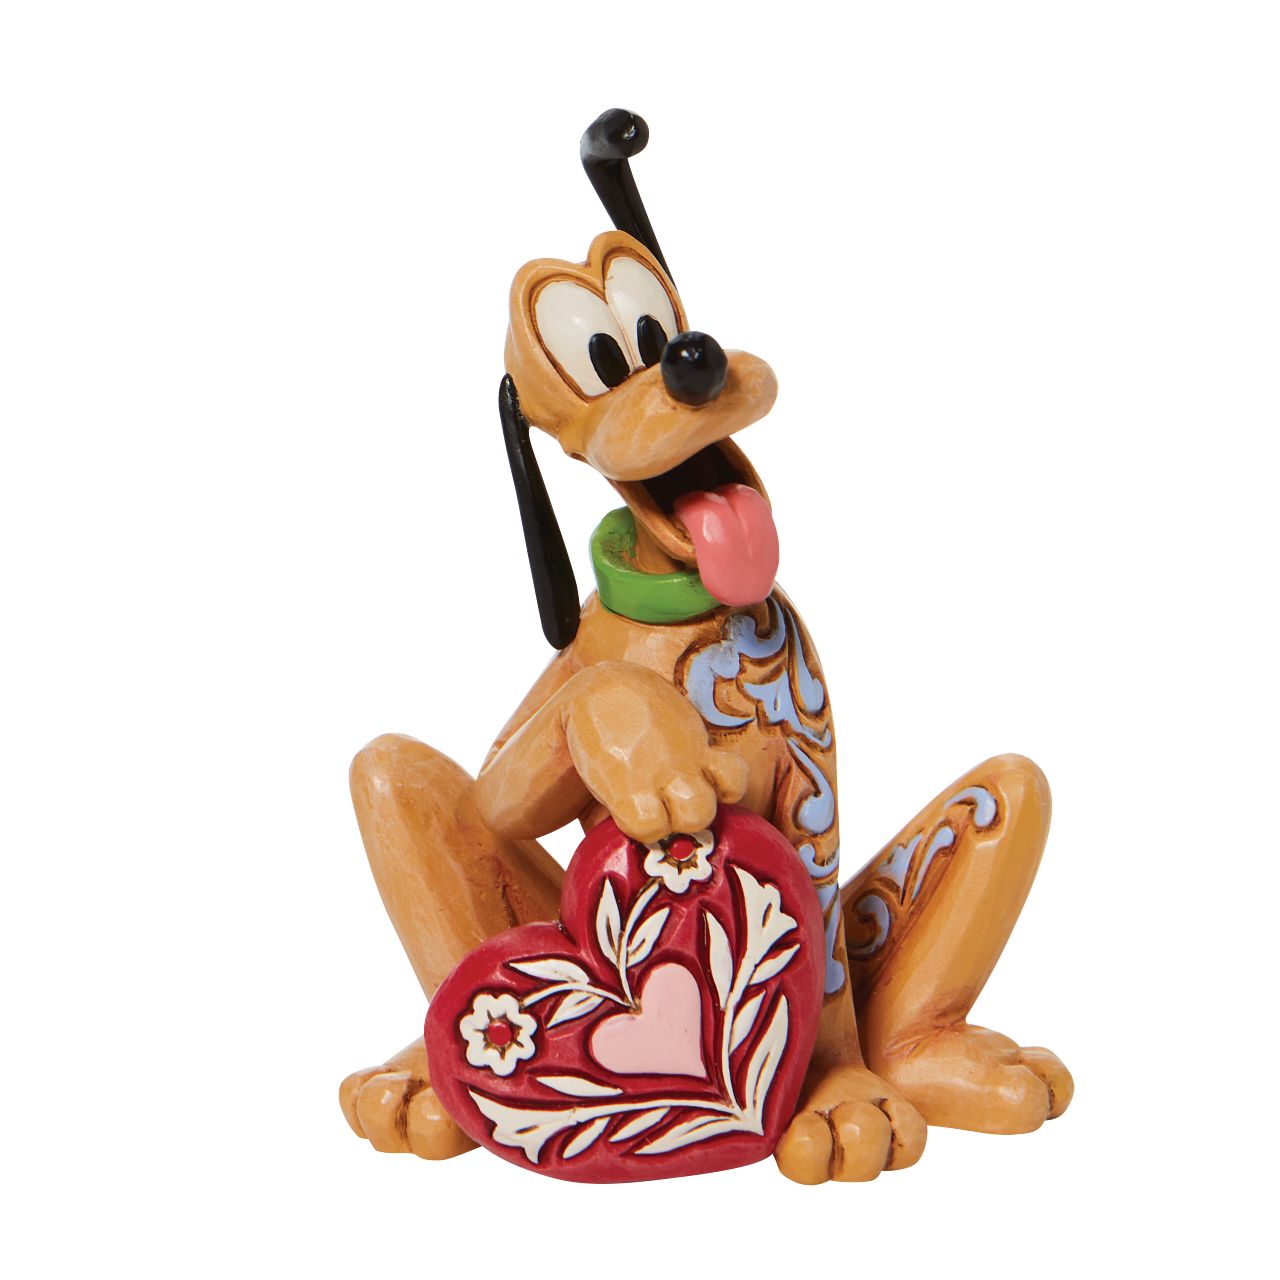 Jim Shore Pluto Heart Mini Figurine  Mickey and Minnie Mouse's pet dog, Pluto the pup, holds a rosemaled heart under his yellow paw in this lively Jim Shore figurine from Disney Traditions. With one ear raised inquisitively, Pluto wears a giddy expression in this delightful miniature.